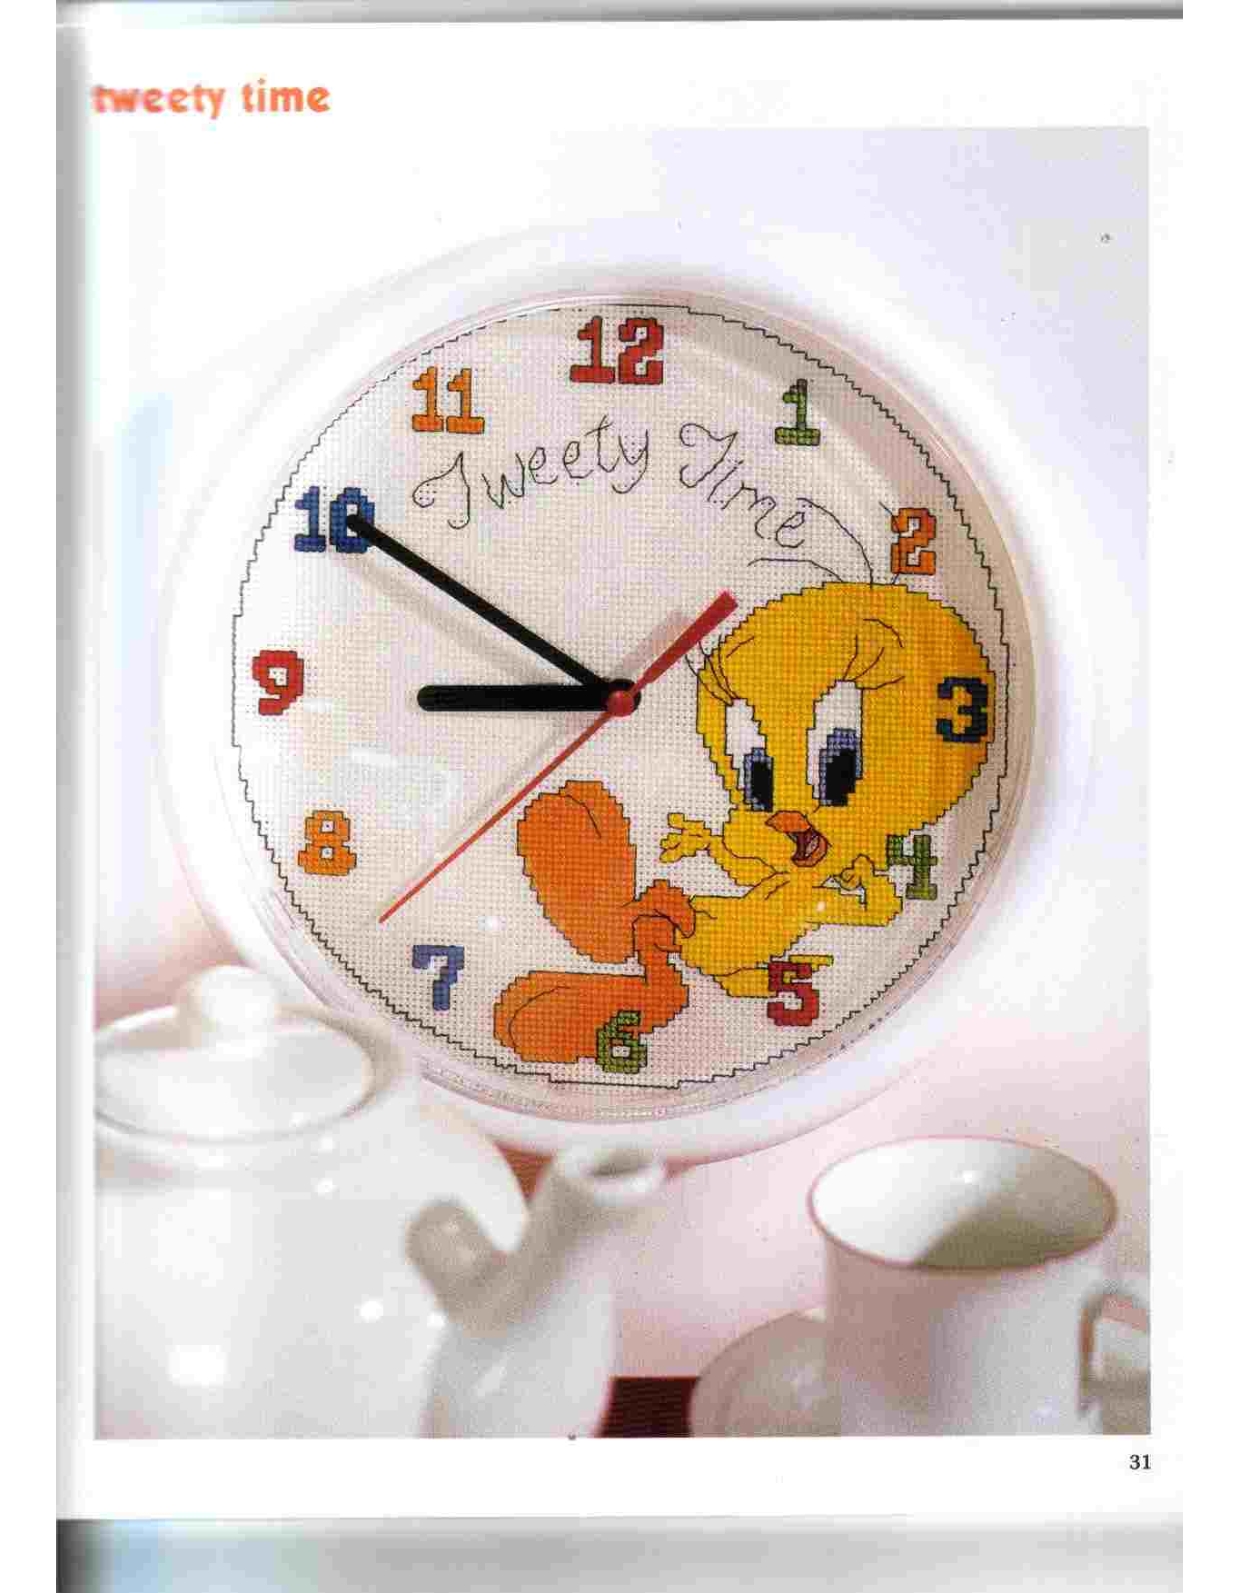 Cross stitch clock with Tweety from Looney Tunes (1)